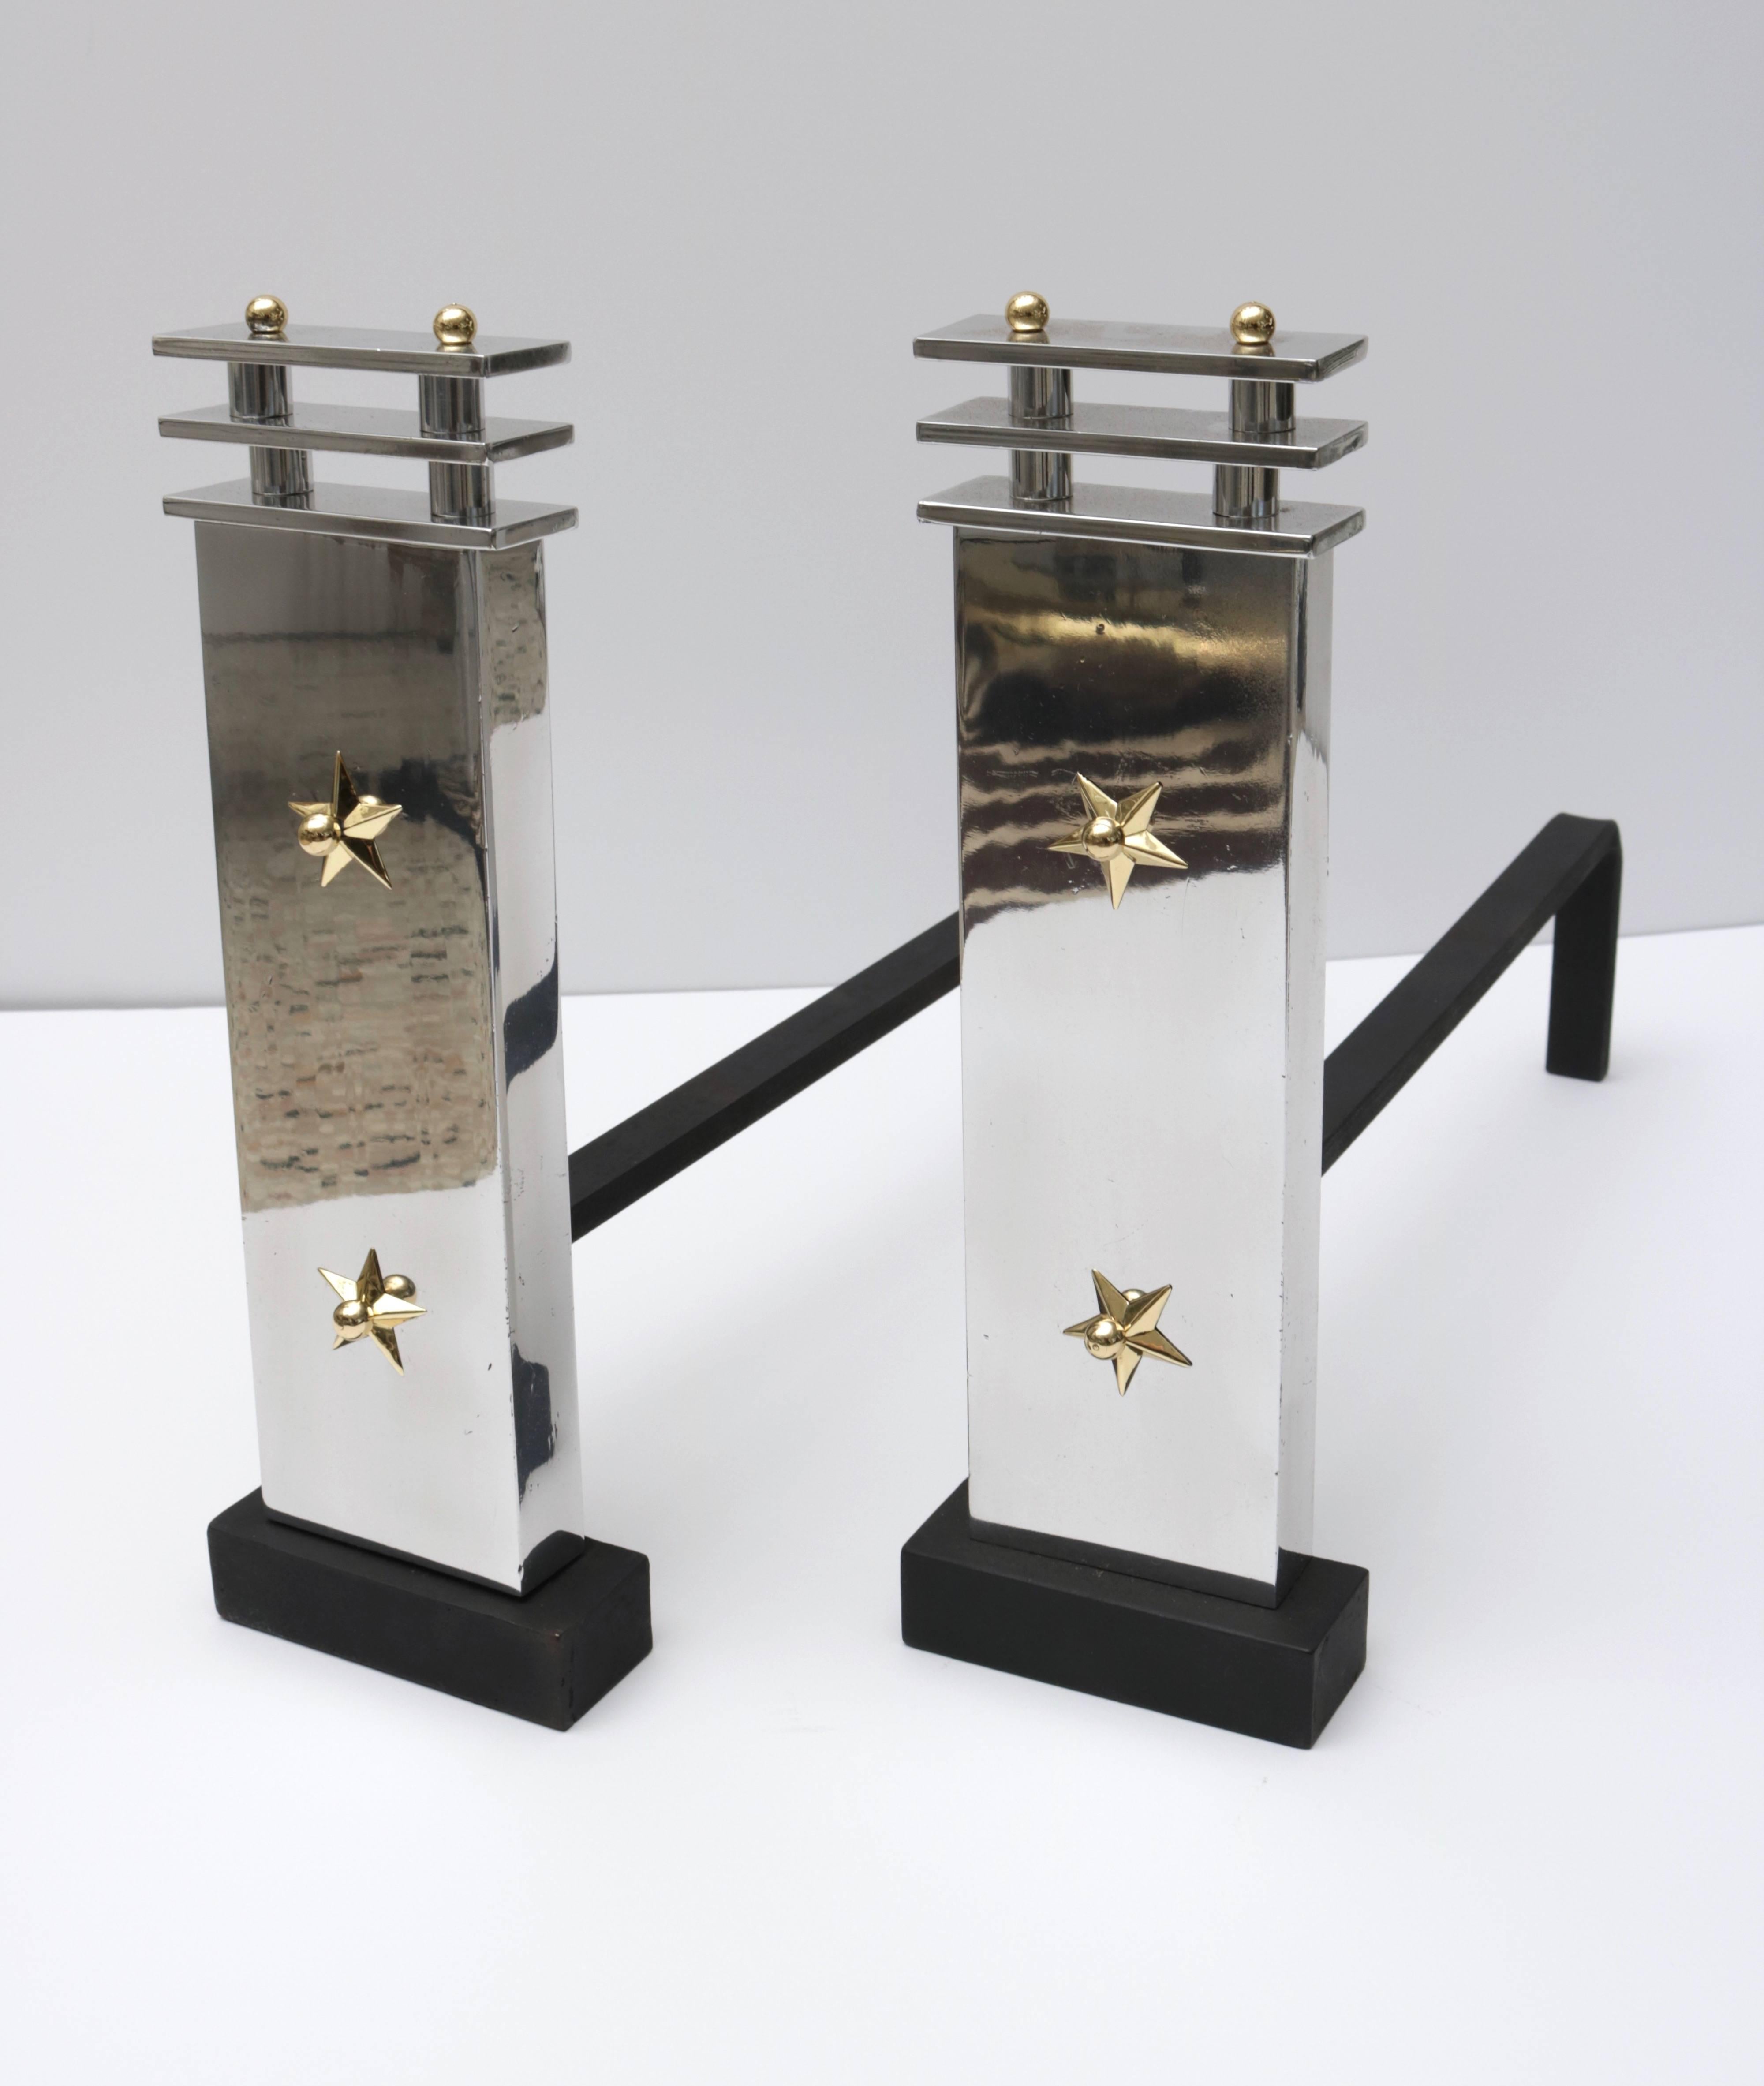 This stylish set of Art Deco style andirons date from the 1920s-1930s and are fabricated in aluminum, brass and wrought iron. 

Note: They have been professionally polished and are ready to set the tone for your fireplace.

 